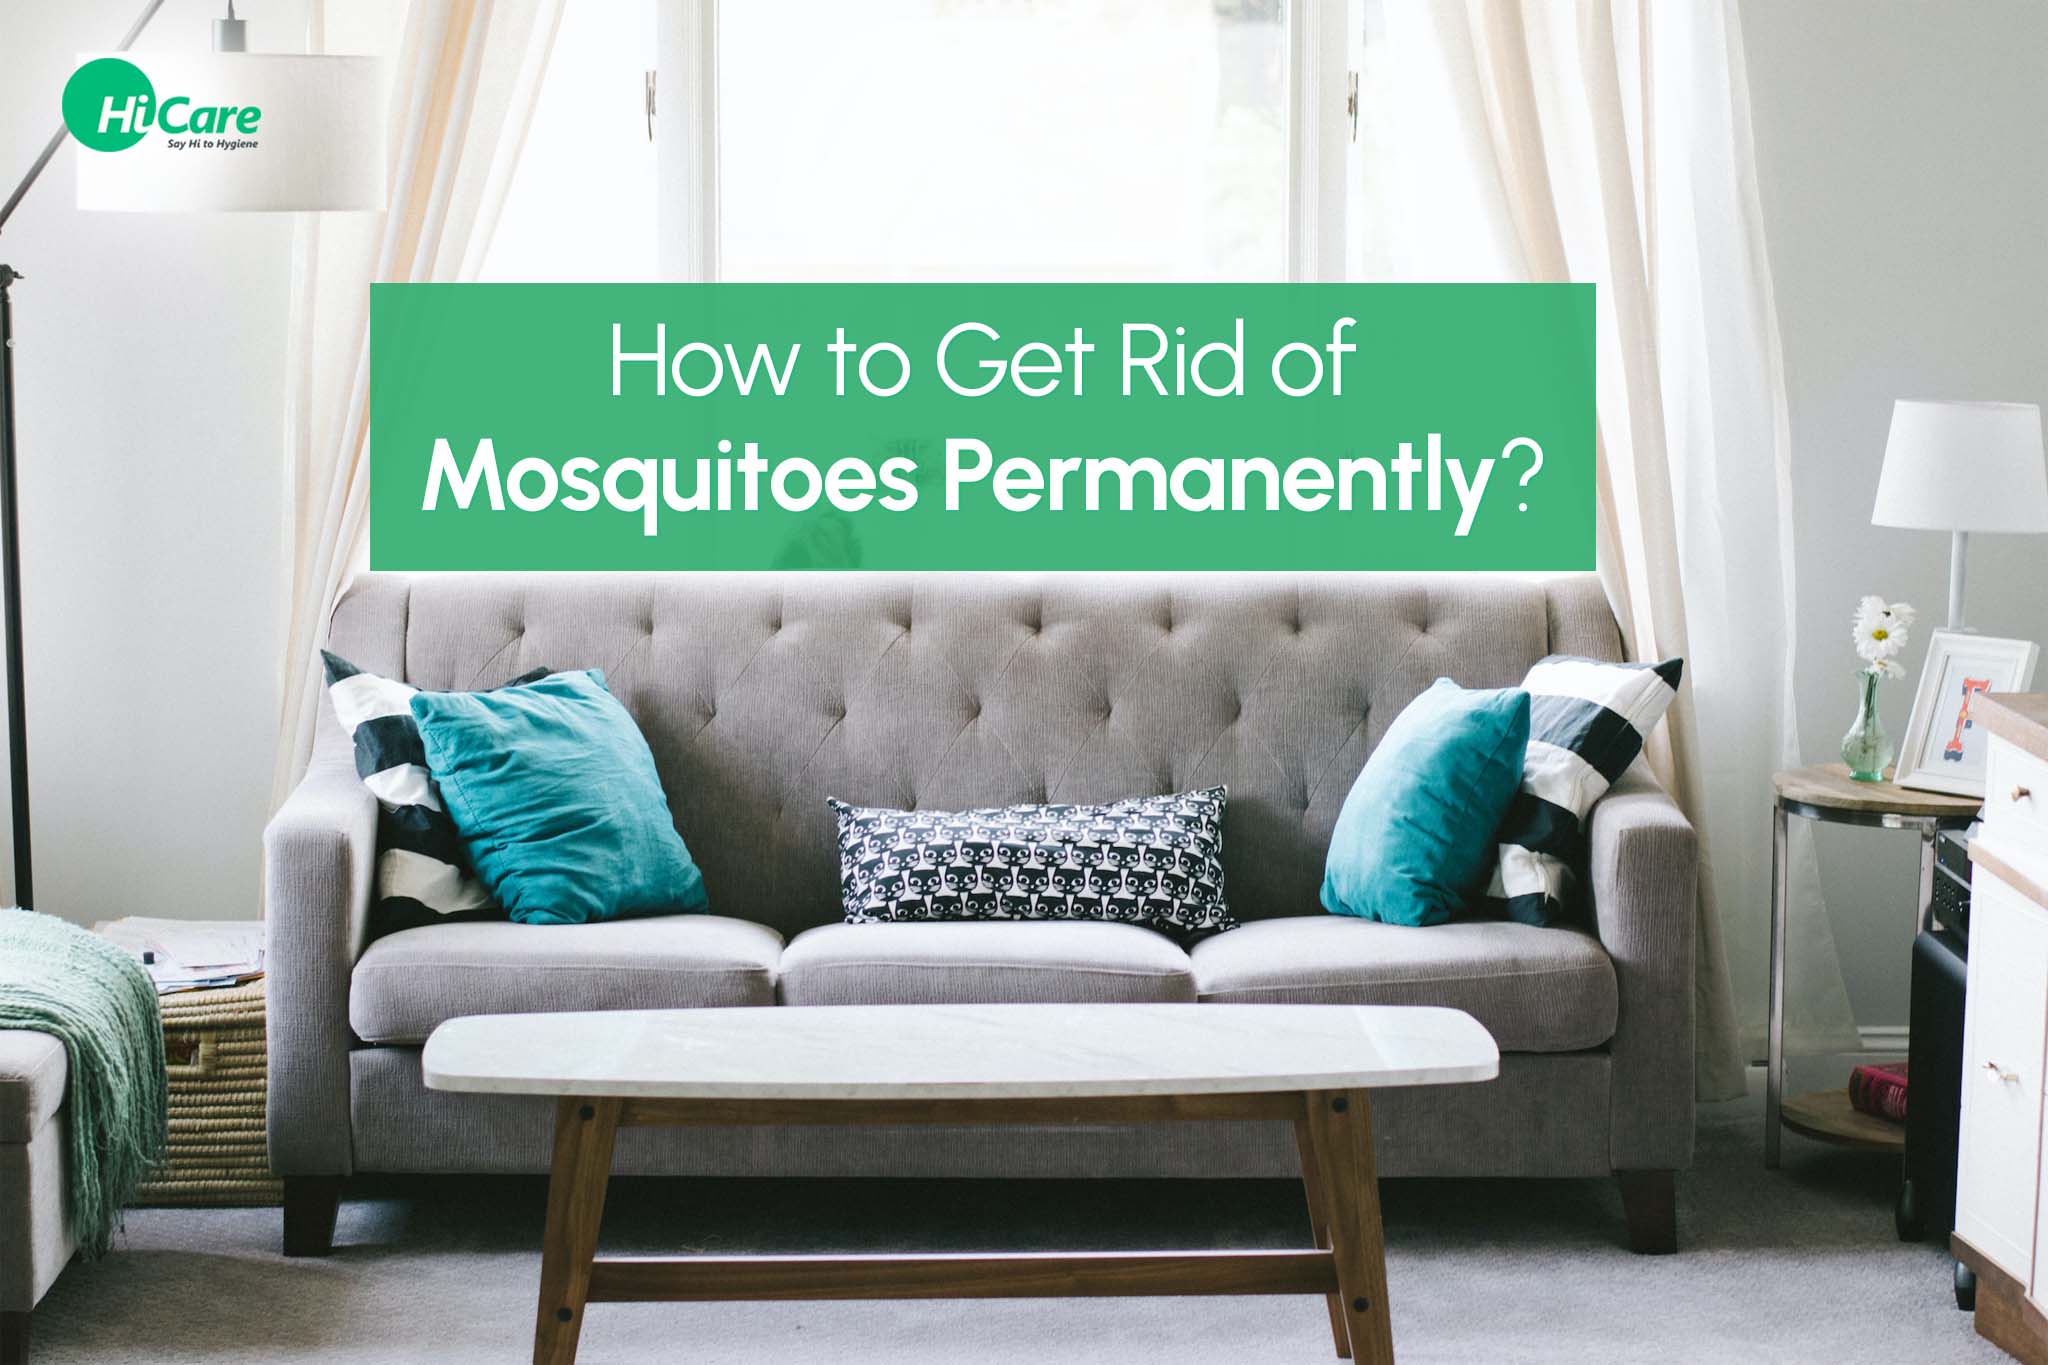 How to Get Rid of Mosquitoes Permanently?